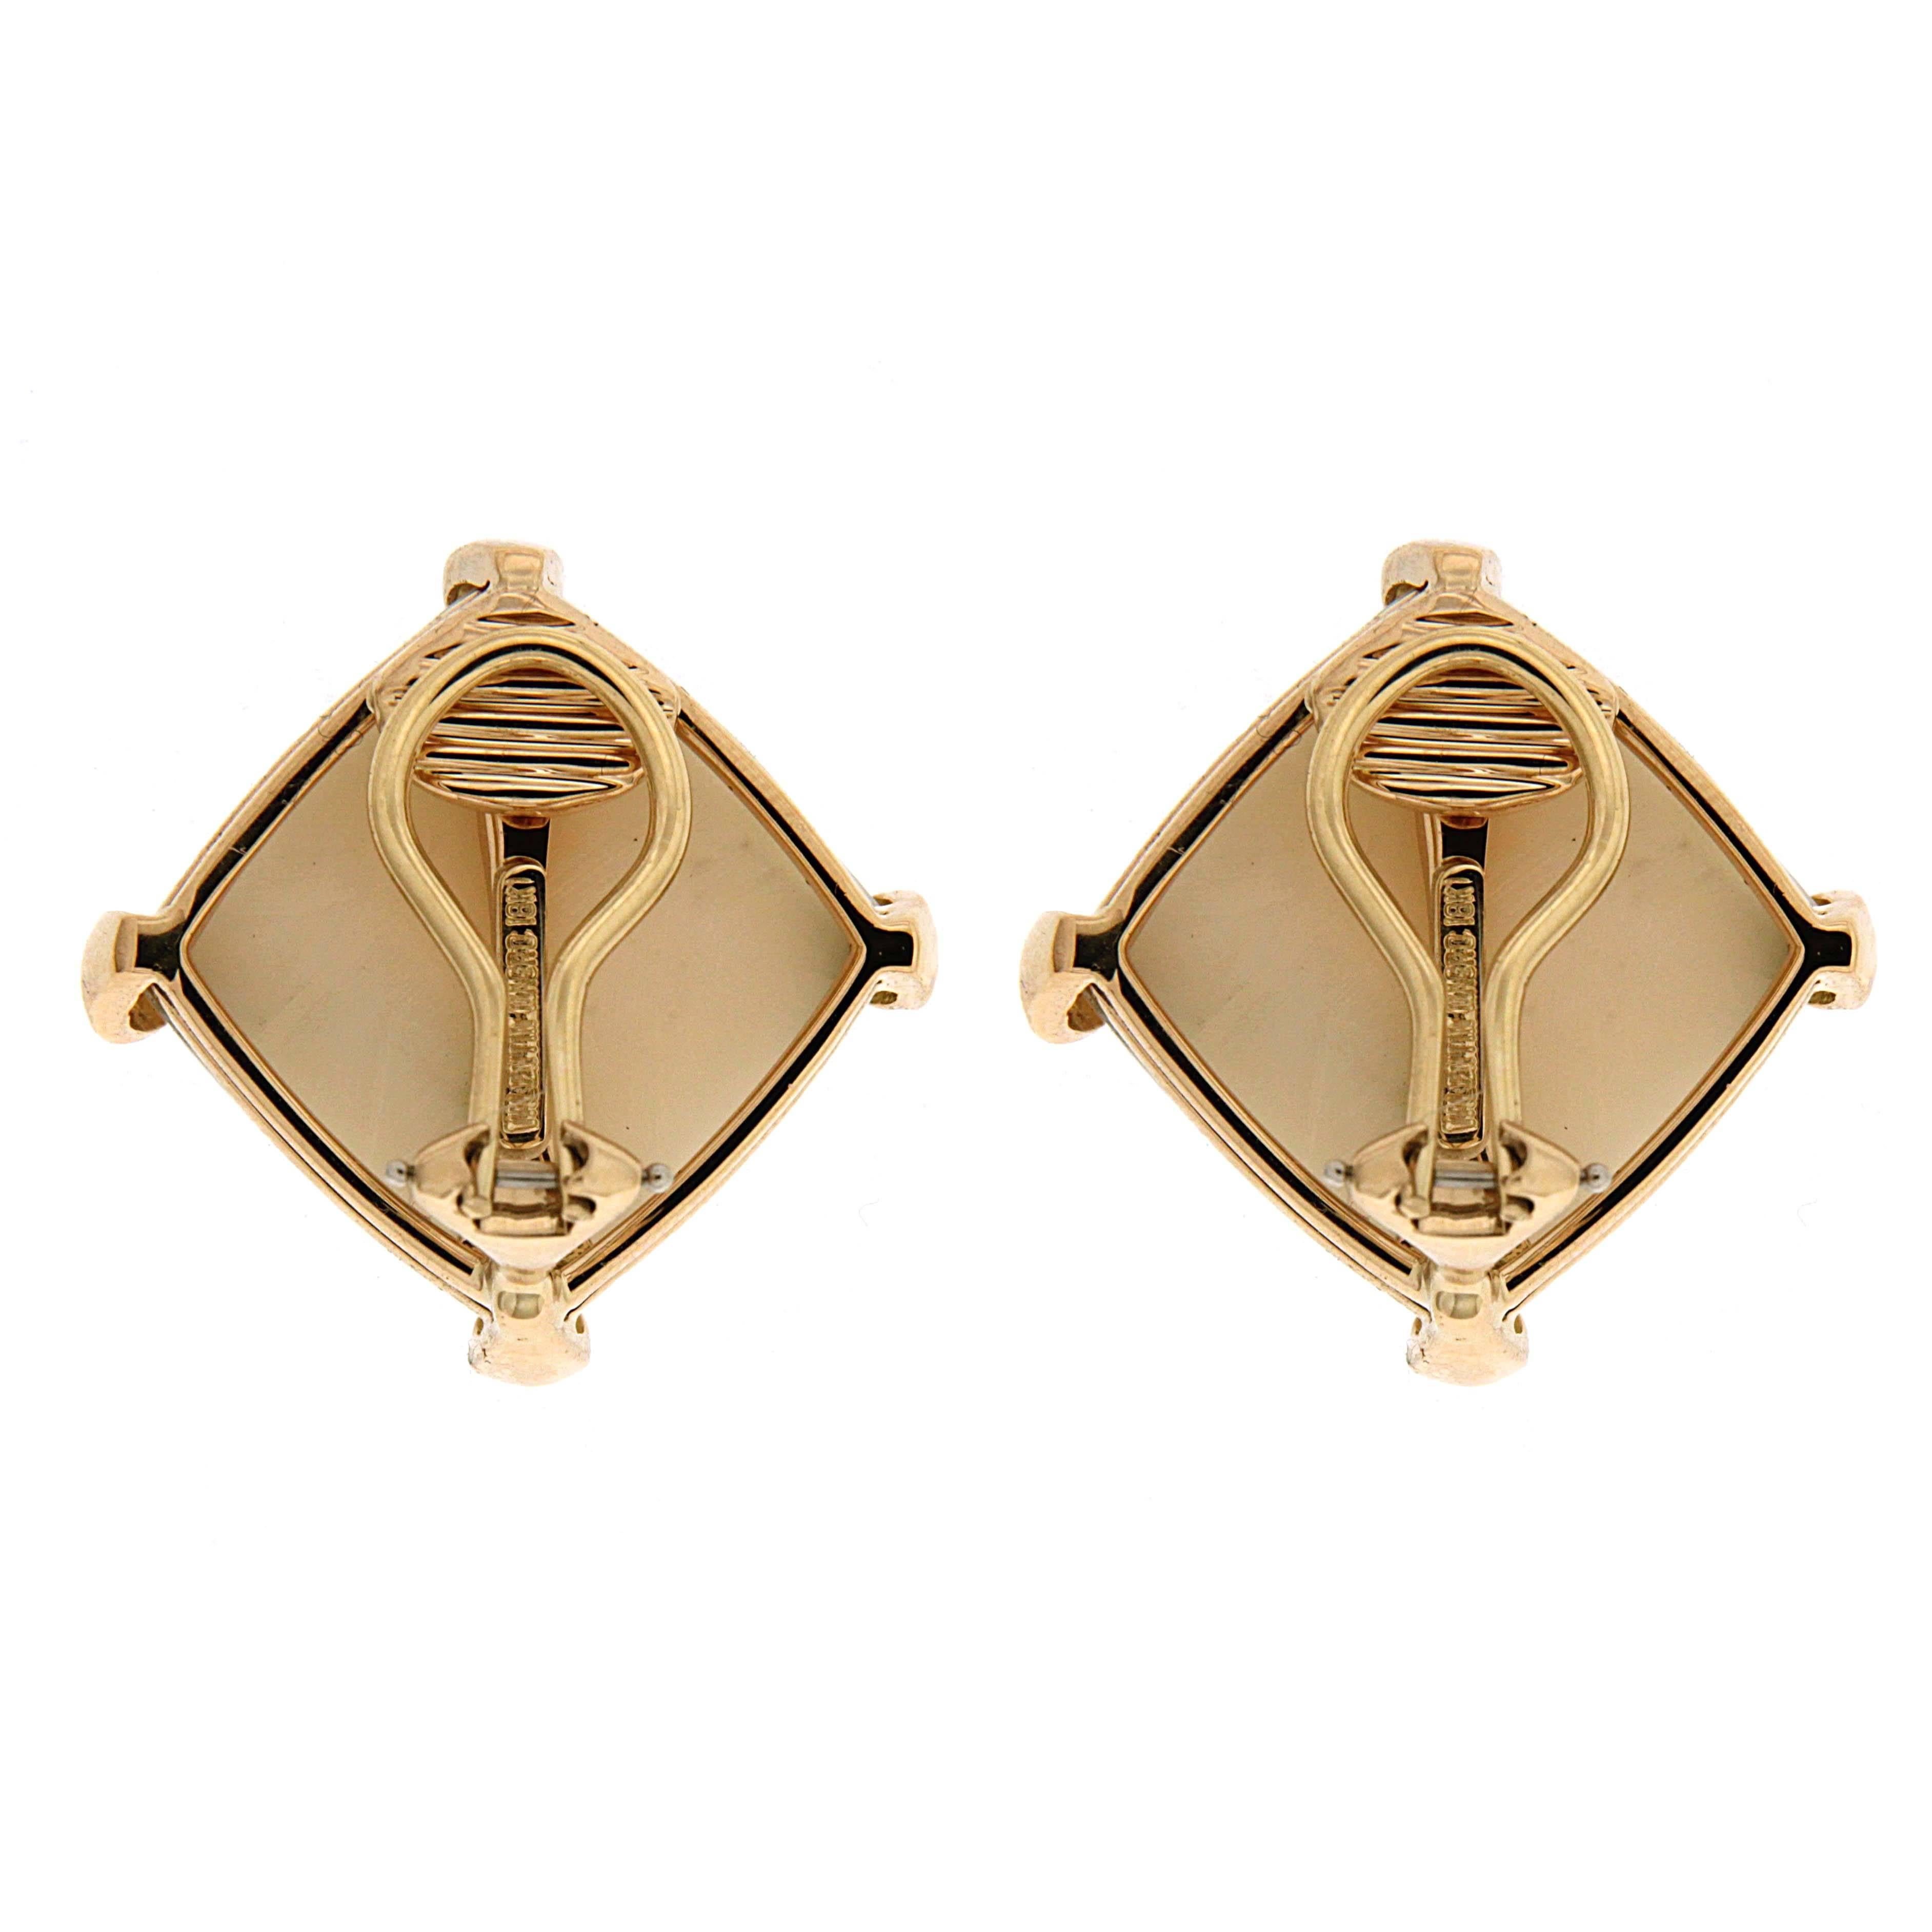 Cushion white coral button earrings with corner claws in 18kt yellow gold. The earrings are finished with clip backs.